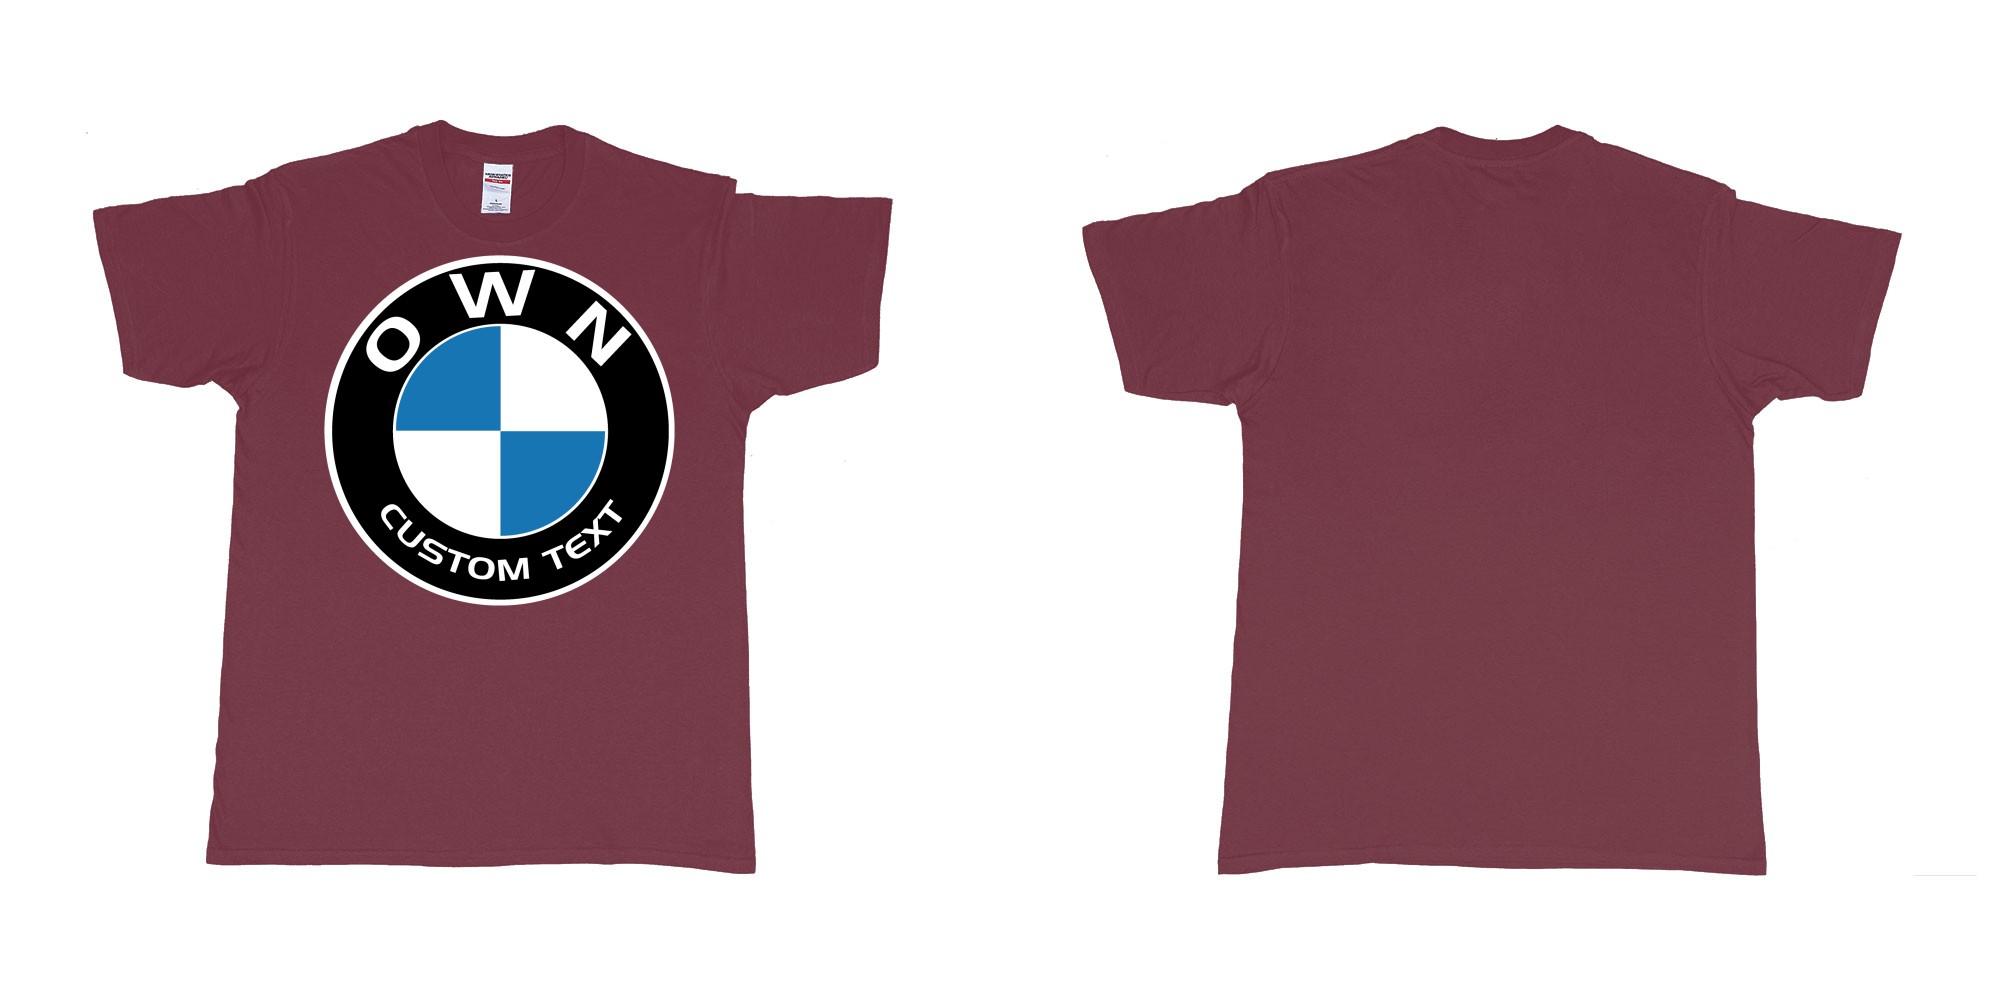 Custom tshirt design BMW logo custom text tshirt printing in fabric color marron choice your own text made in Bali by The Pirate Way